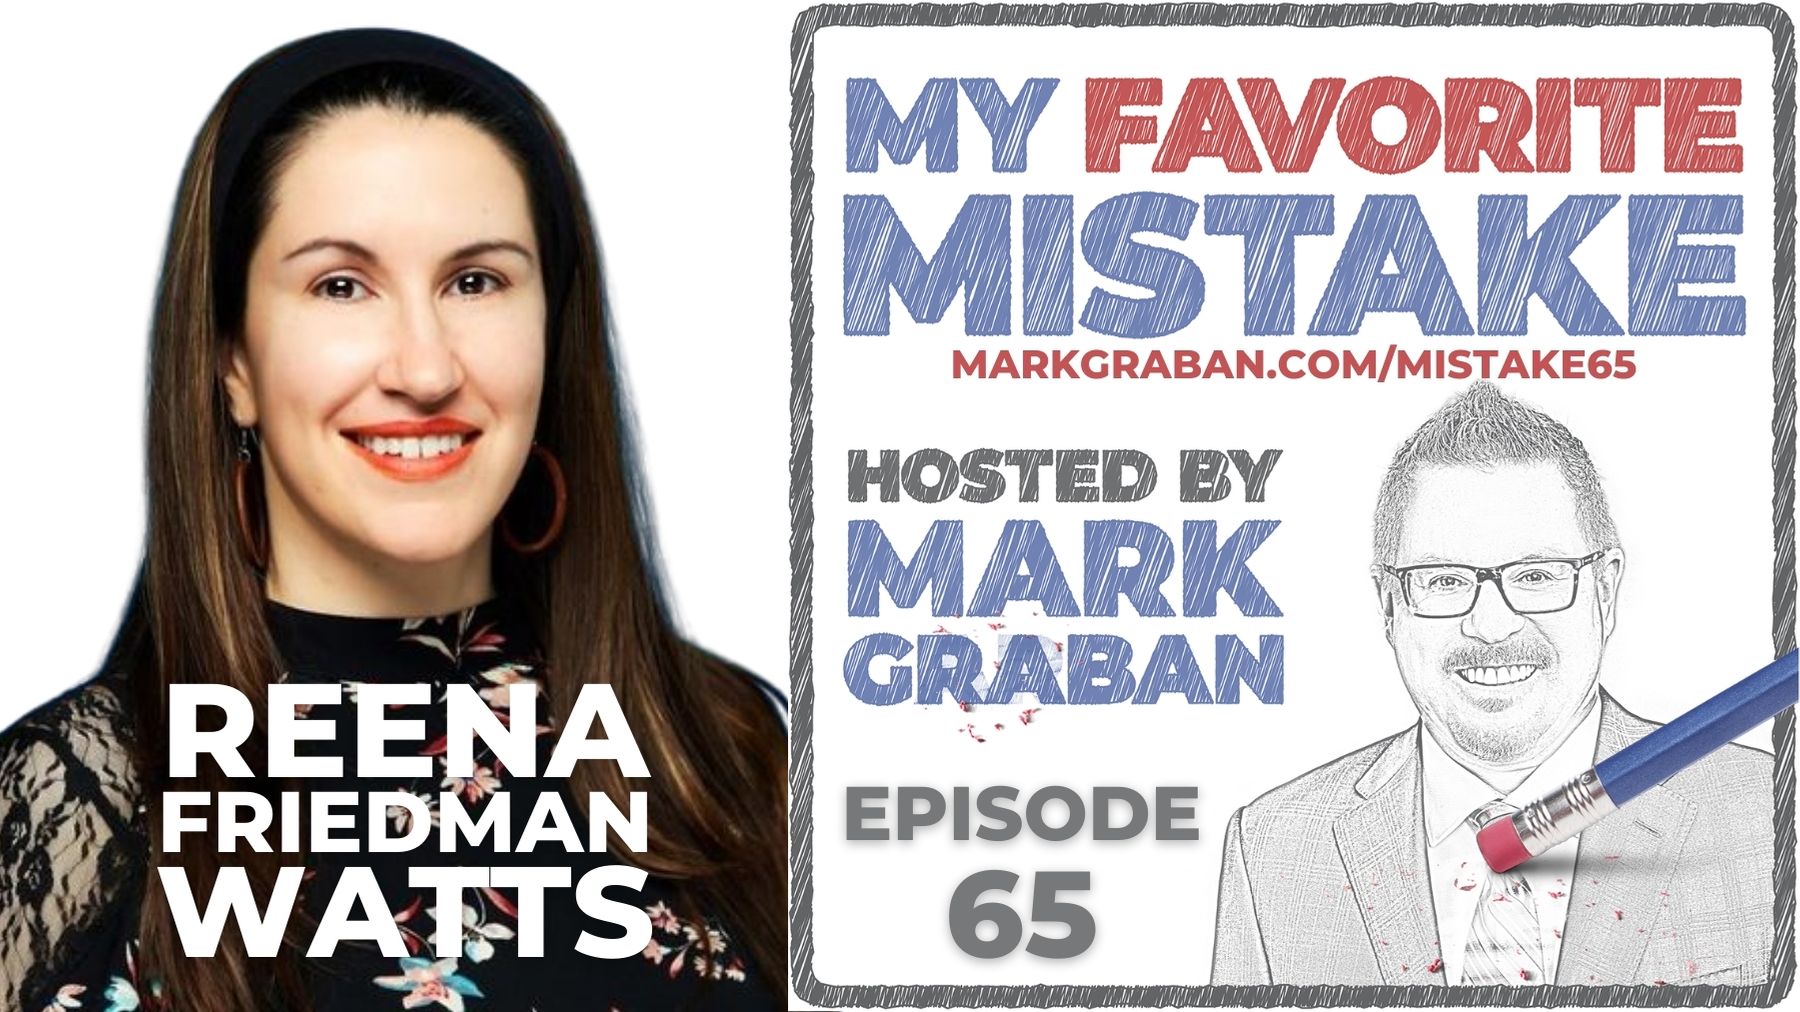 Mistakes On The Jerry Springer Show, Reality TV, And Podcasts: Reena Friedman Watts